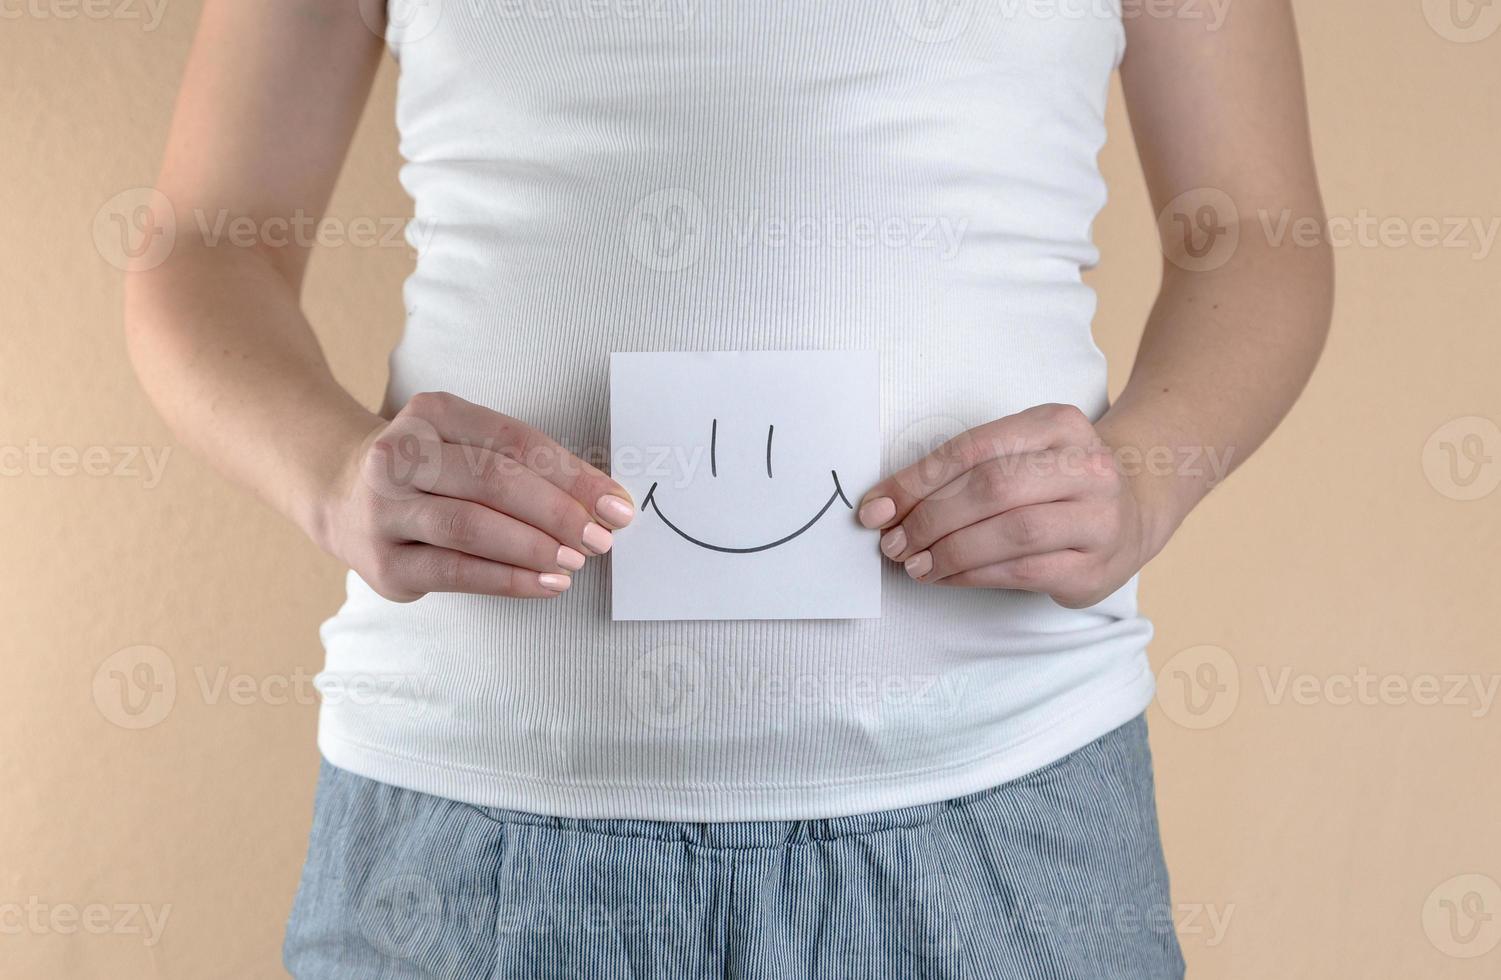 A close up view of the belly of a pregnant woman that is holding a piece of paper with a smiley face photo